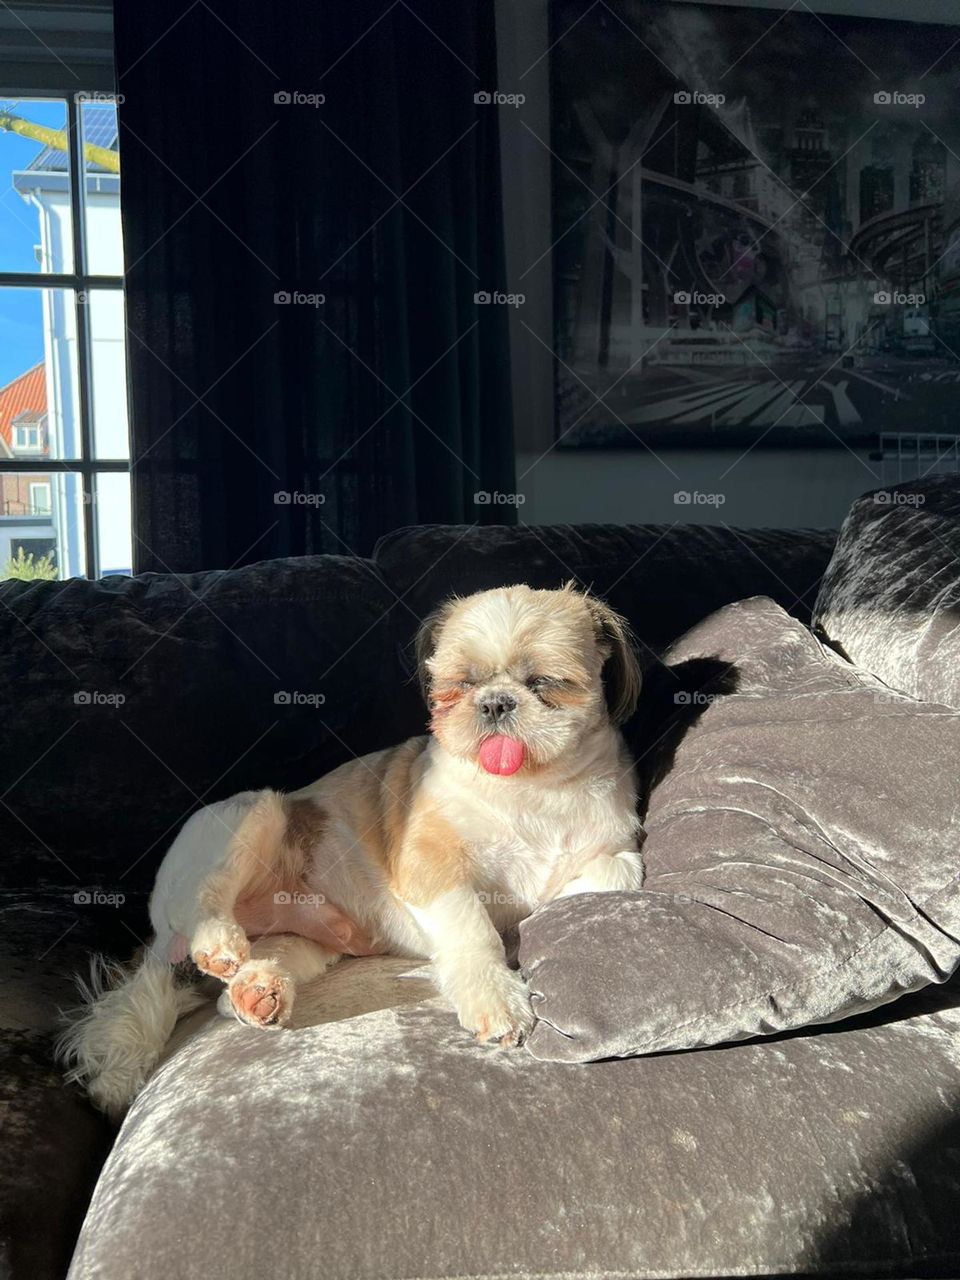 Sunbath on the couch